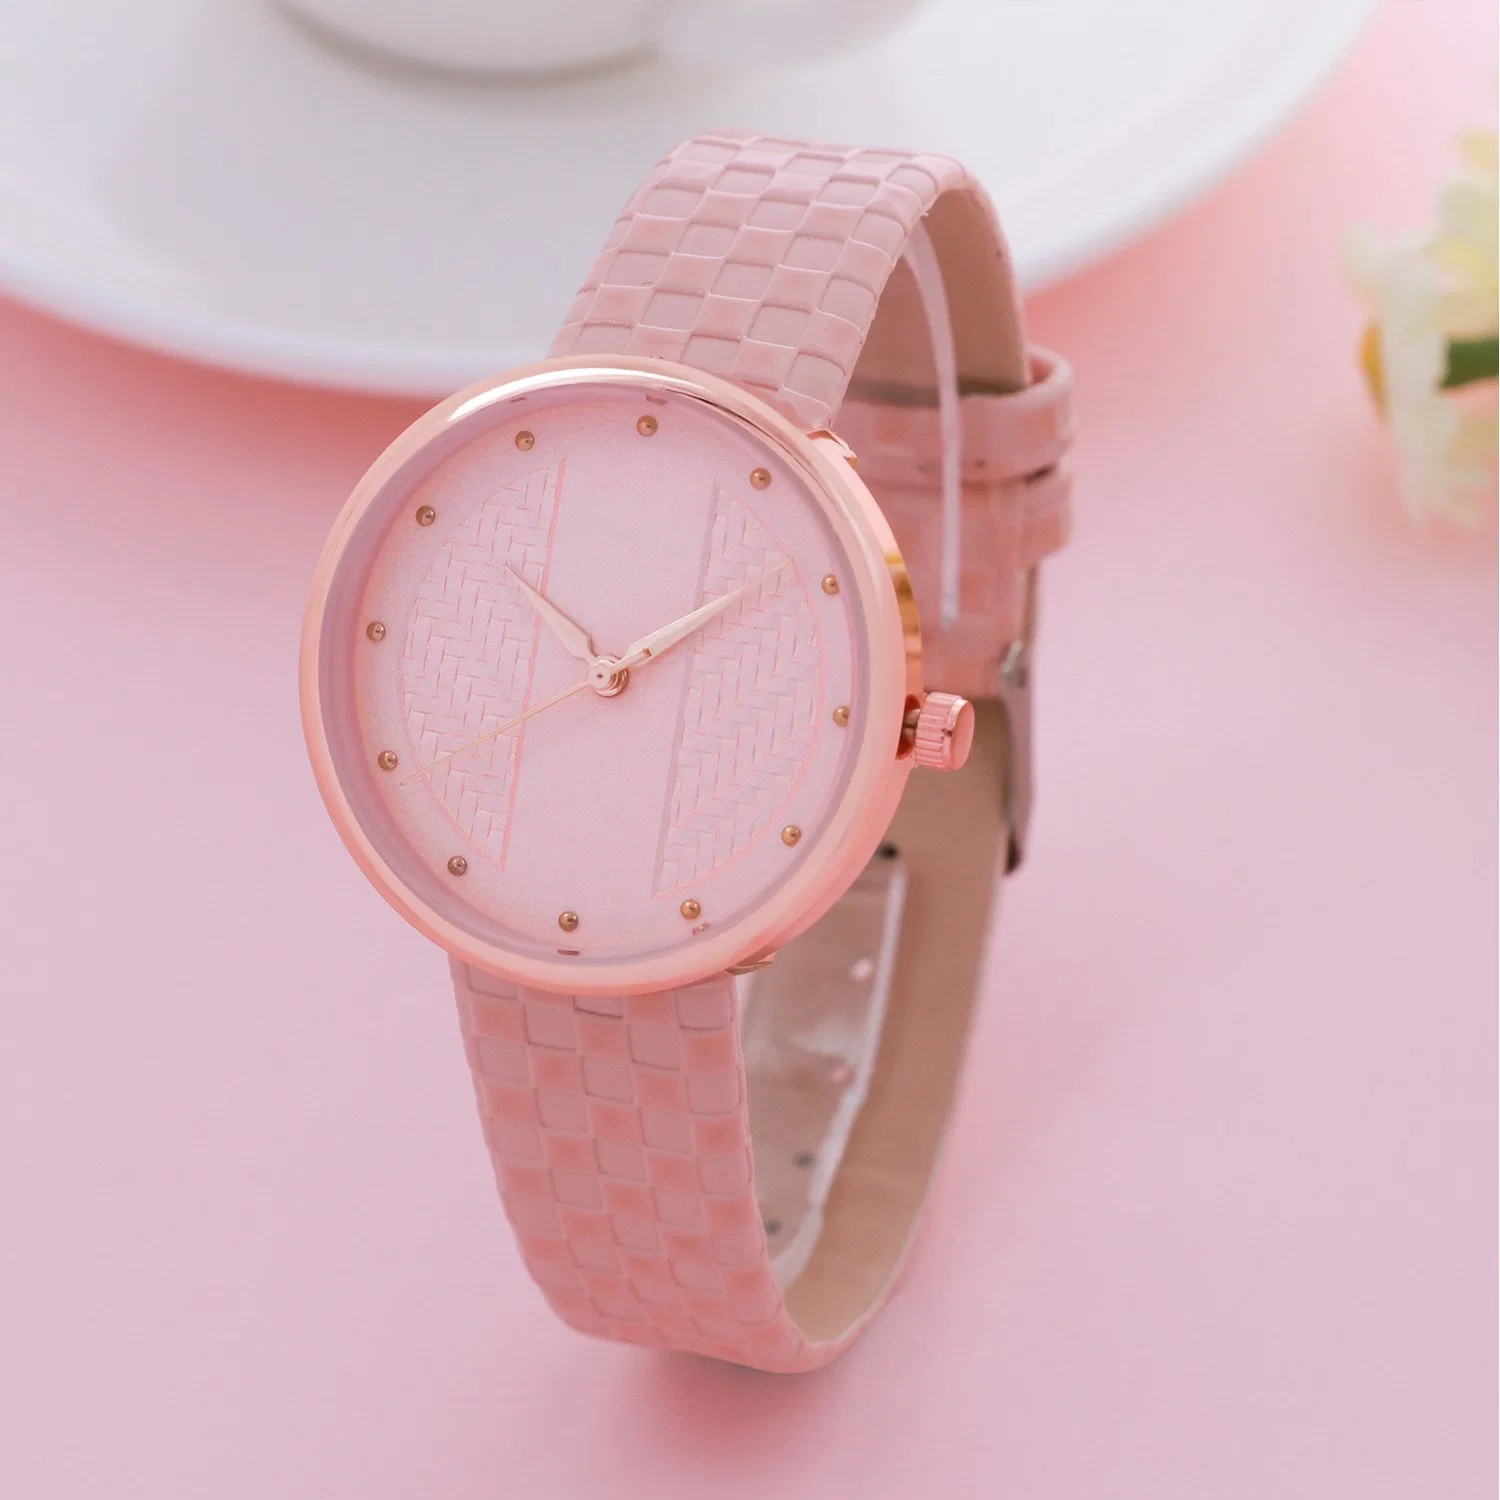 Simple Dial Classic Leather Woman Watch Special Texture Wrist Watch